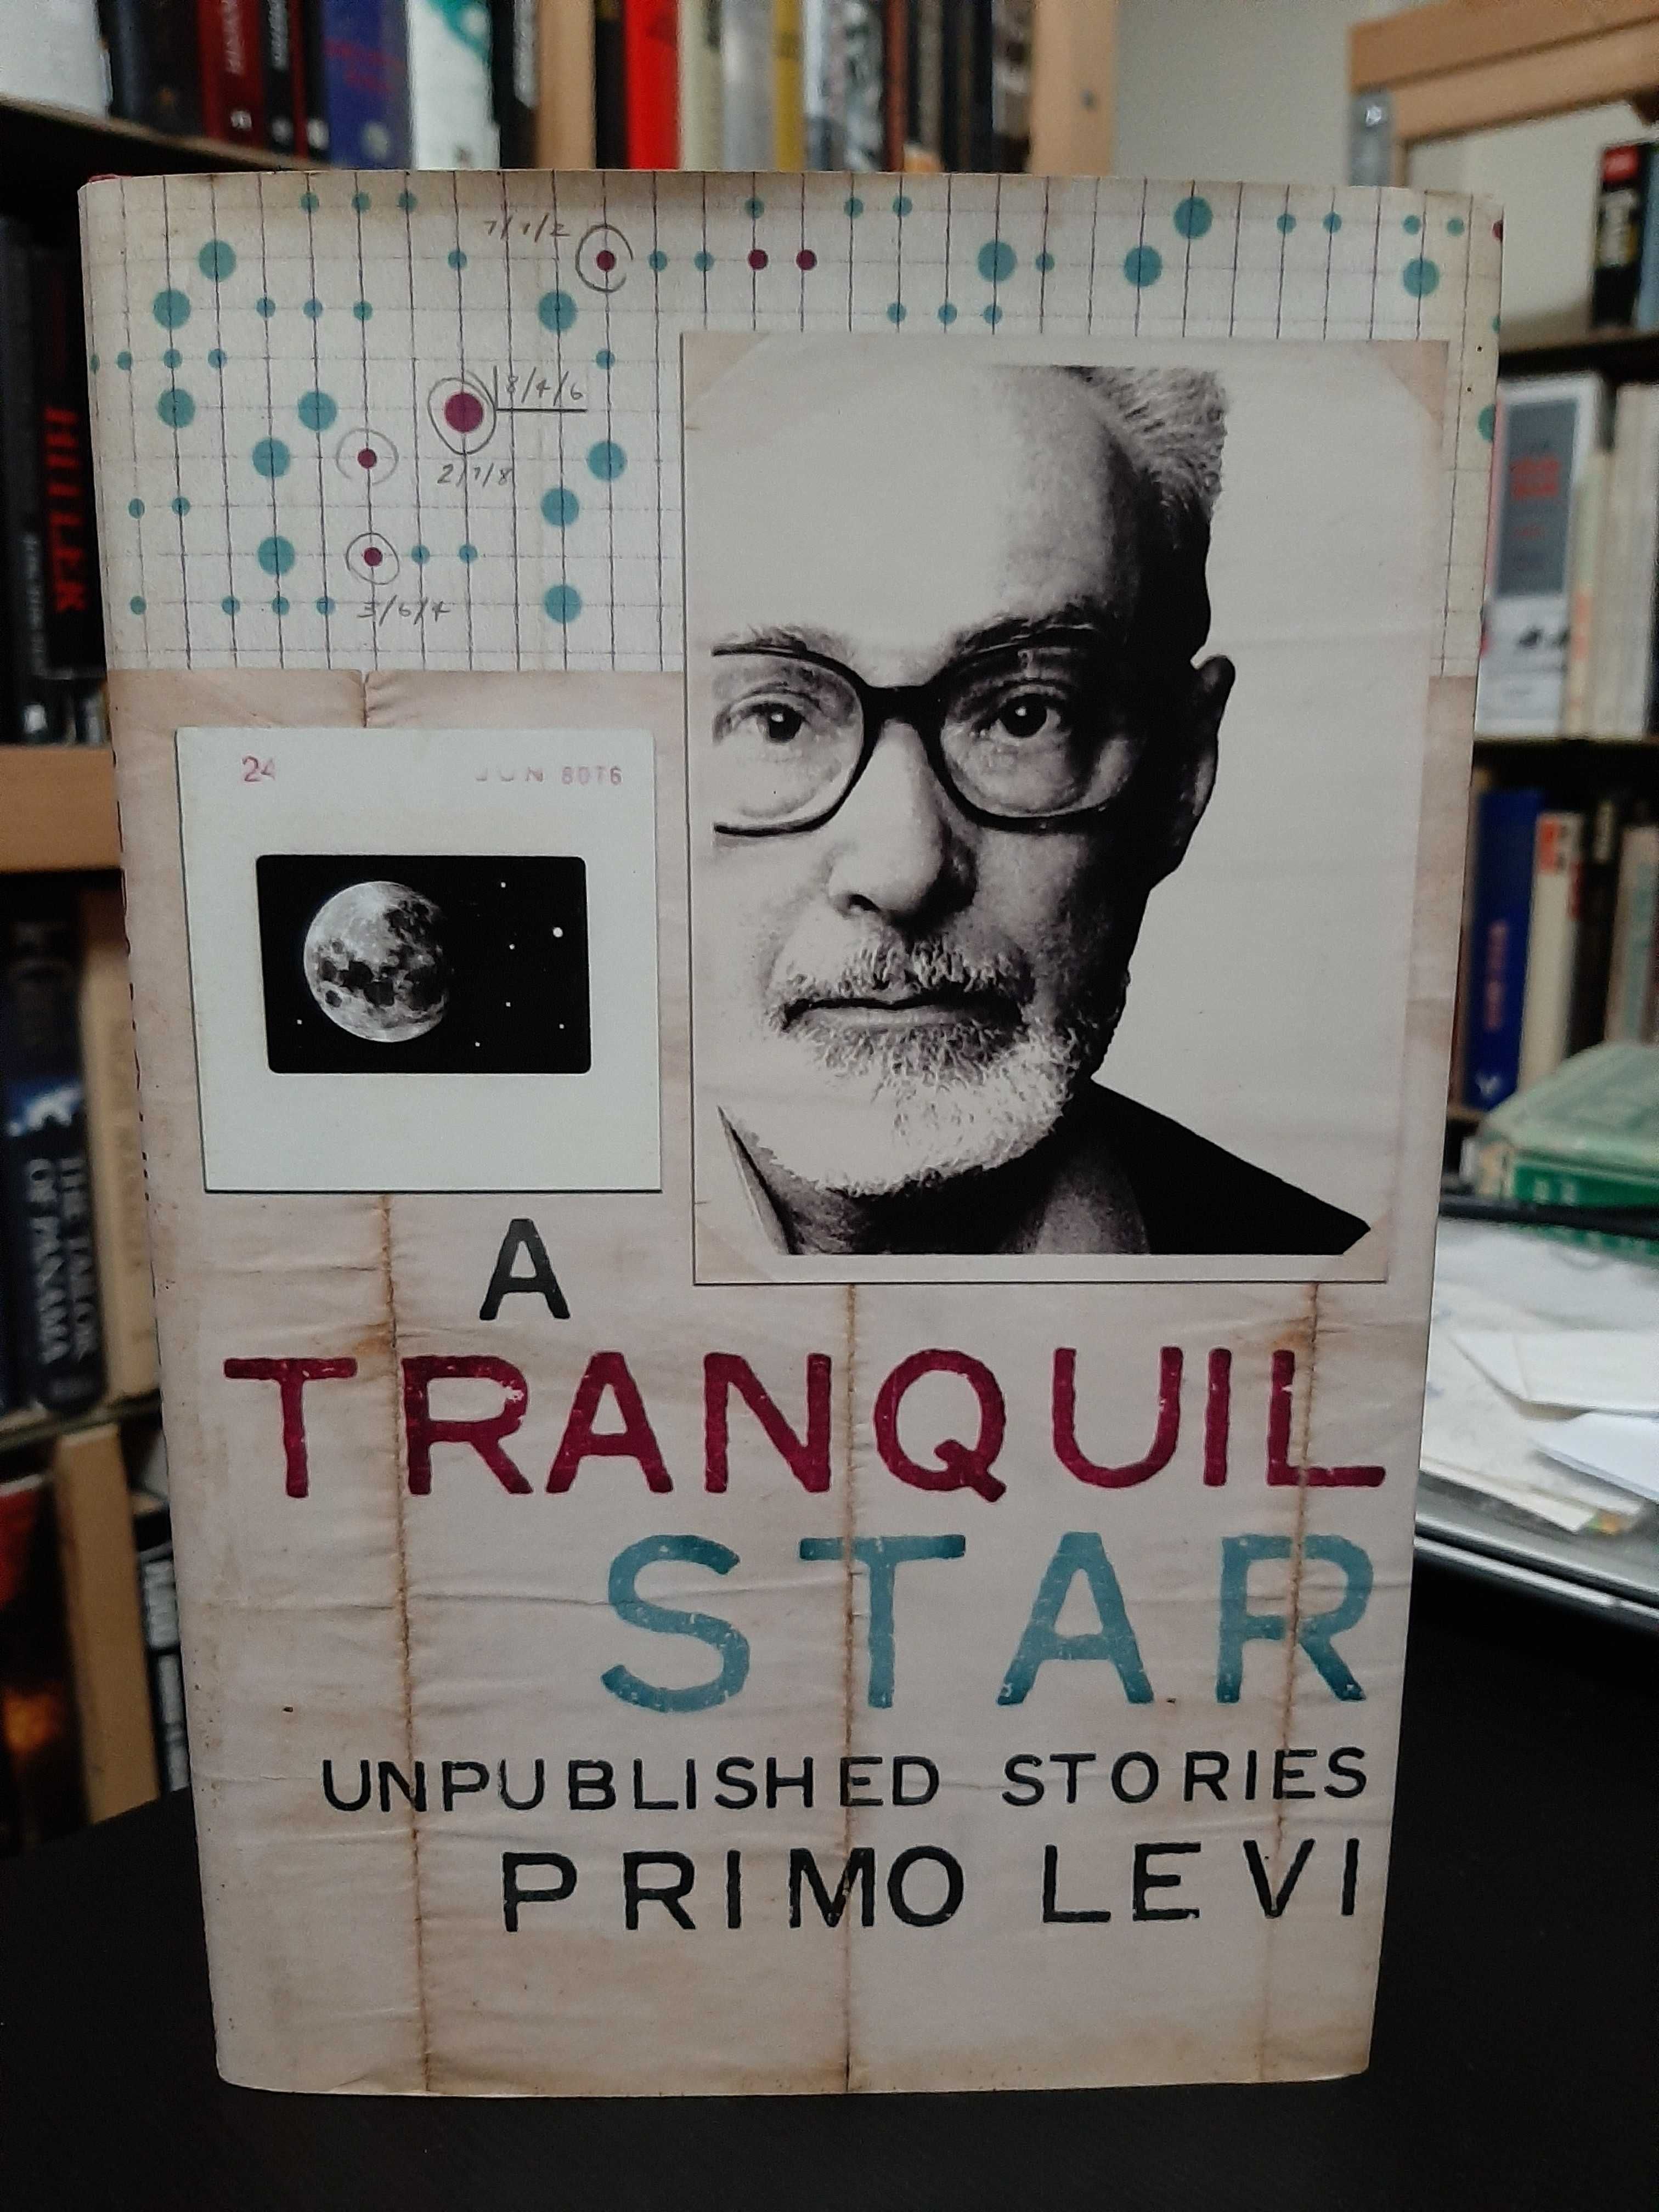 Primo Levi – A Tranquil Star: Unpublished Stories of Primo Levi